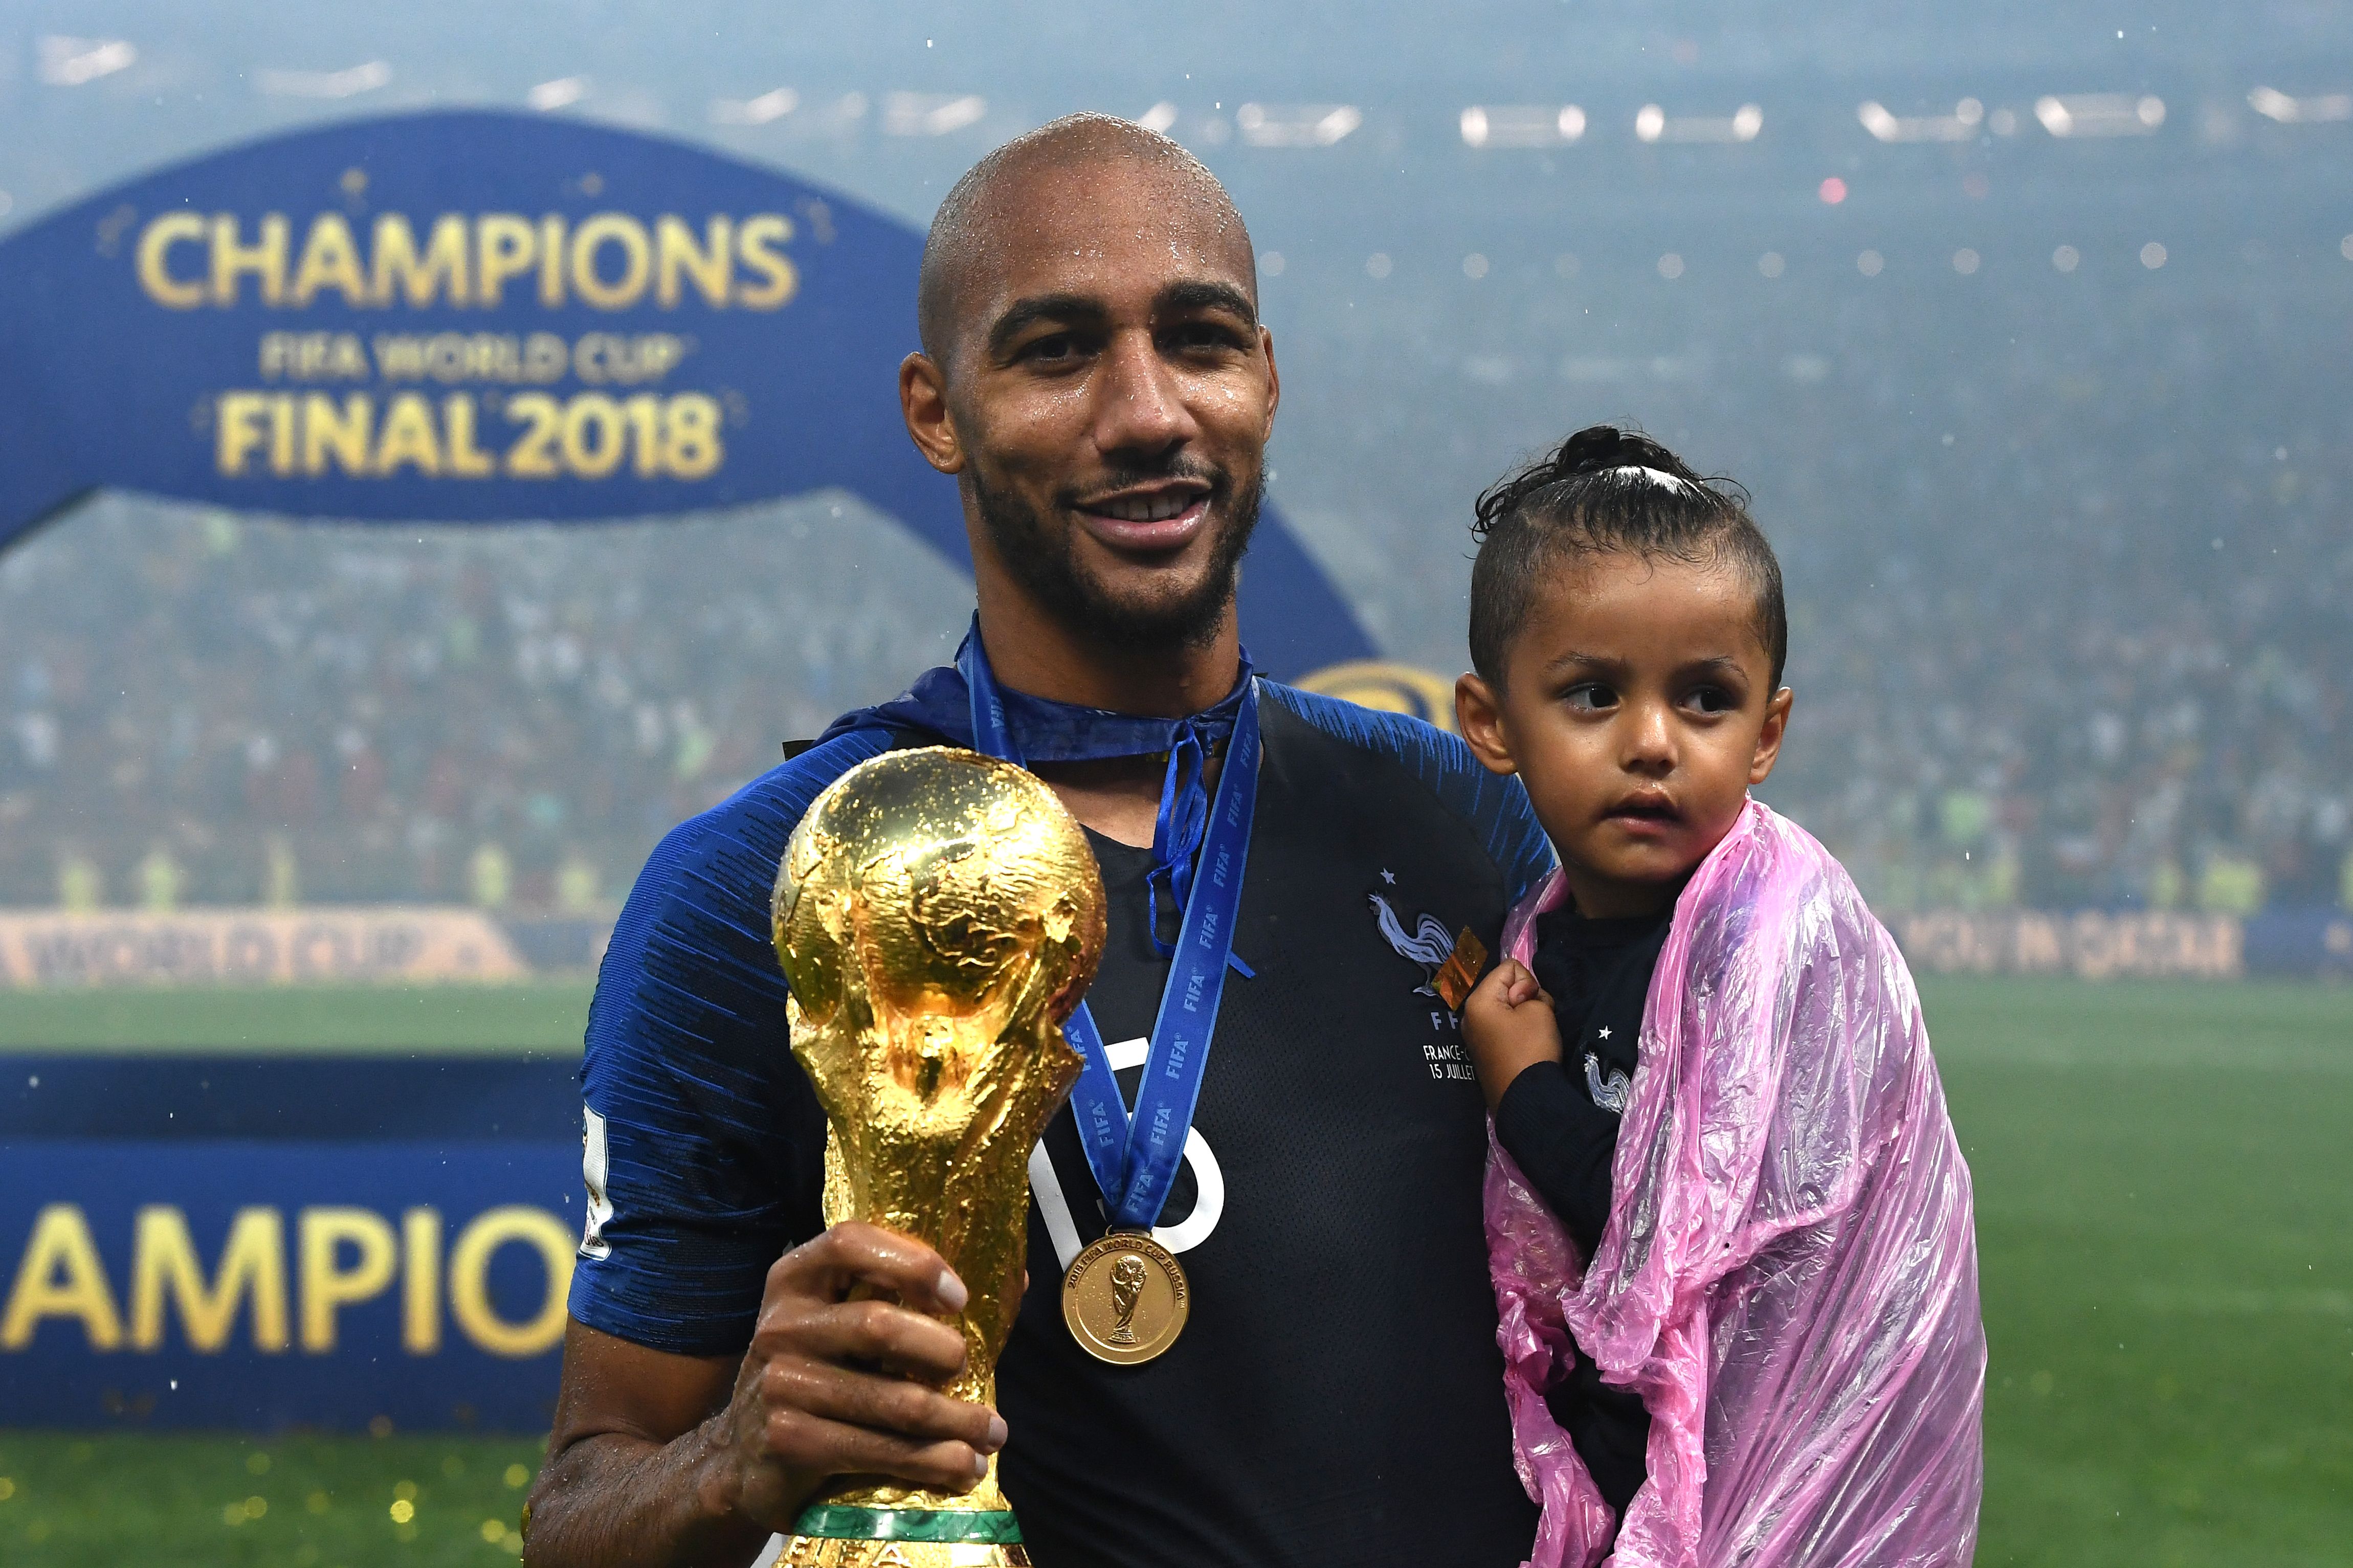 France's midfielder Steven N'Zonzi holds the World Cuop trophy as he poses with his daughter after winning the Russia 2018 World Cup final football match between France and Croatia at the Luzhniki Stadium in Moscow on July 15, 2018. (Photo by FRANCK FIFE / AFP) / RESTRICTED TO EDITORIAL USE - NO MOBILE PUSH ALERTS/DOWNLOADS        (Photo credit should read FRANCK FIFE/AFP/Getty Images)